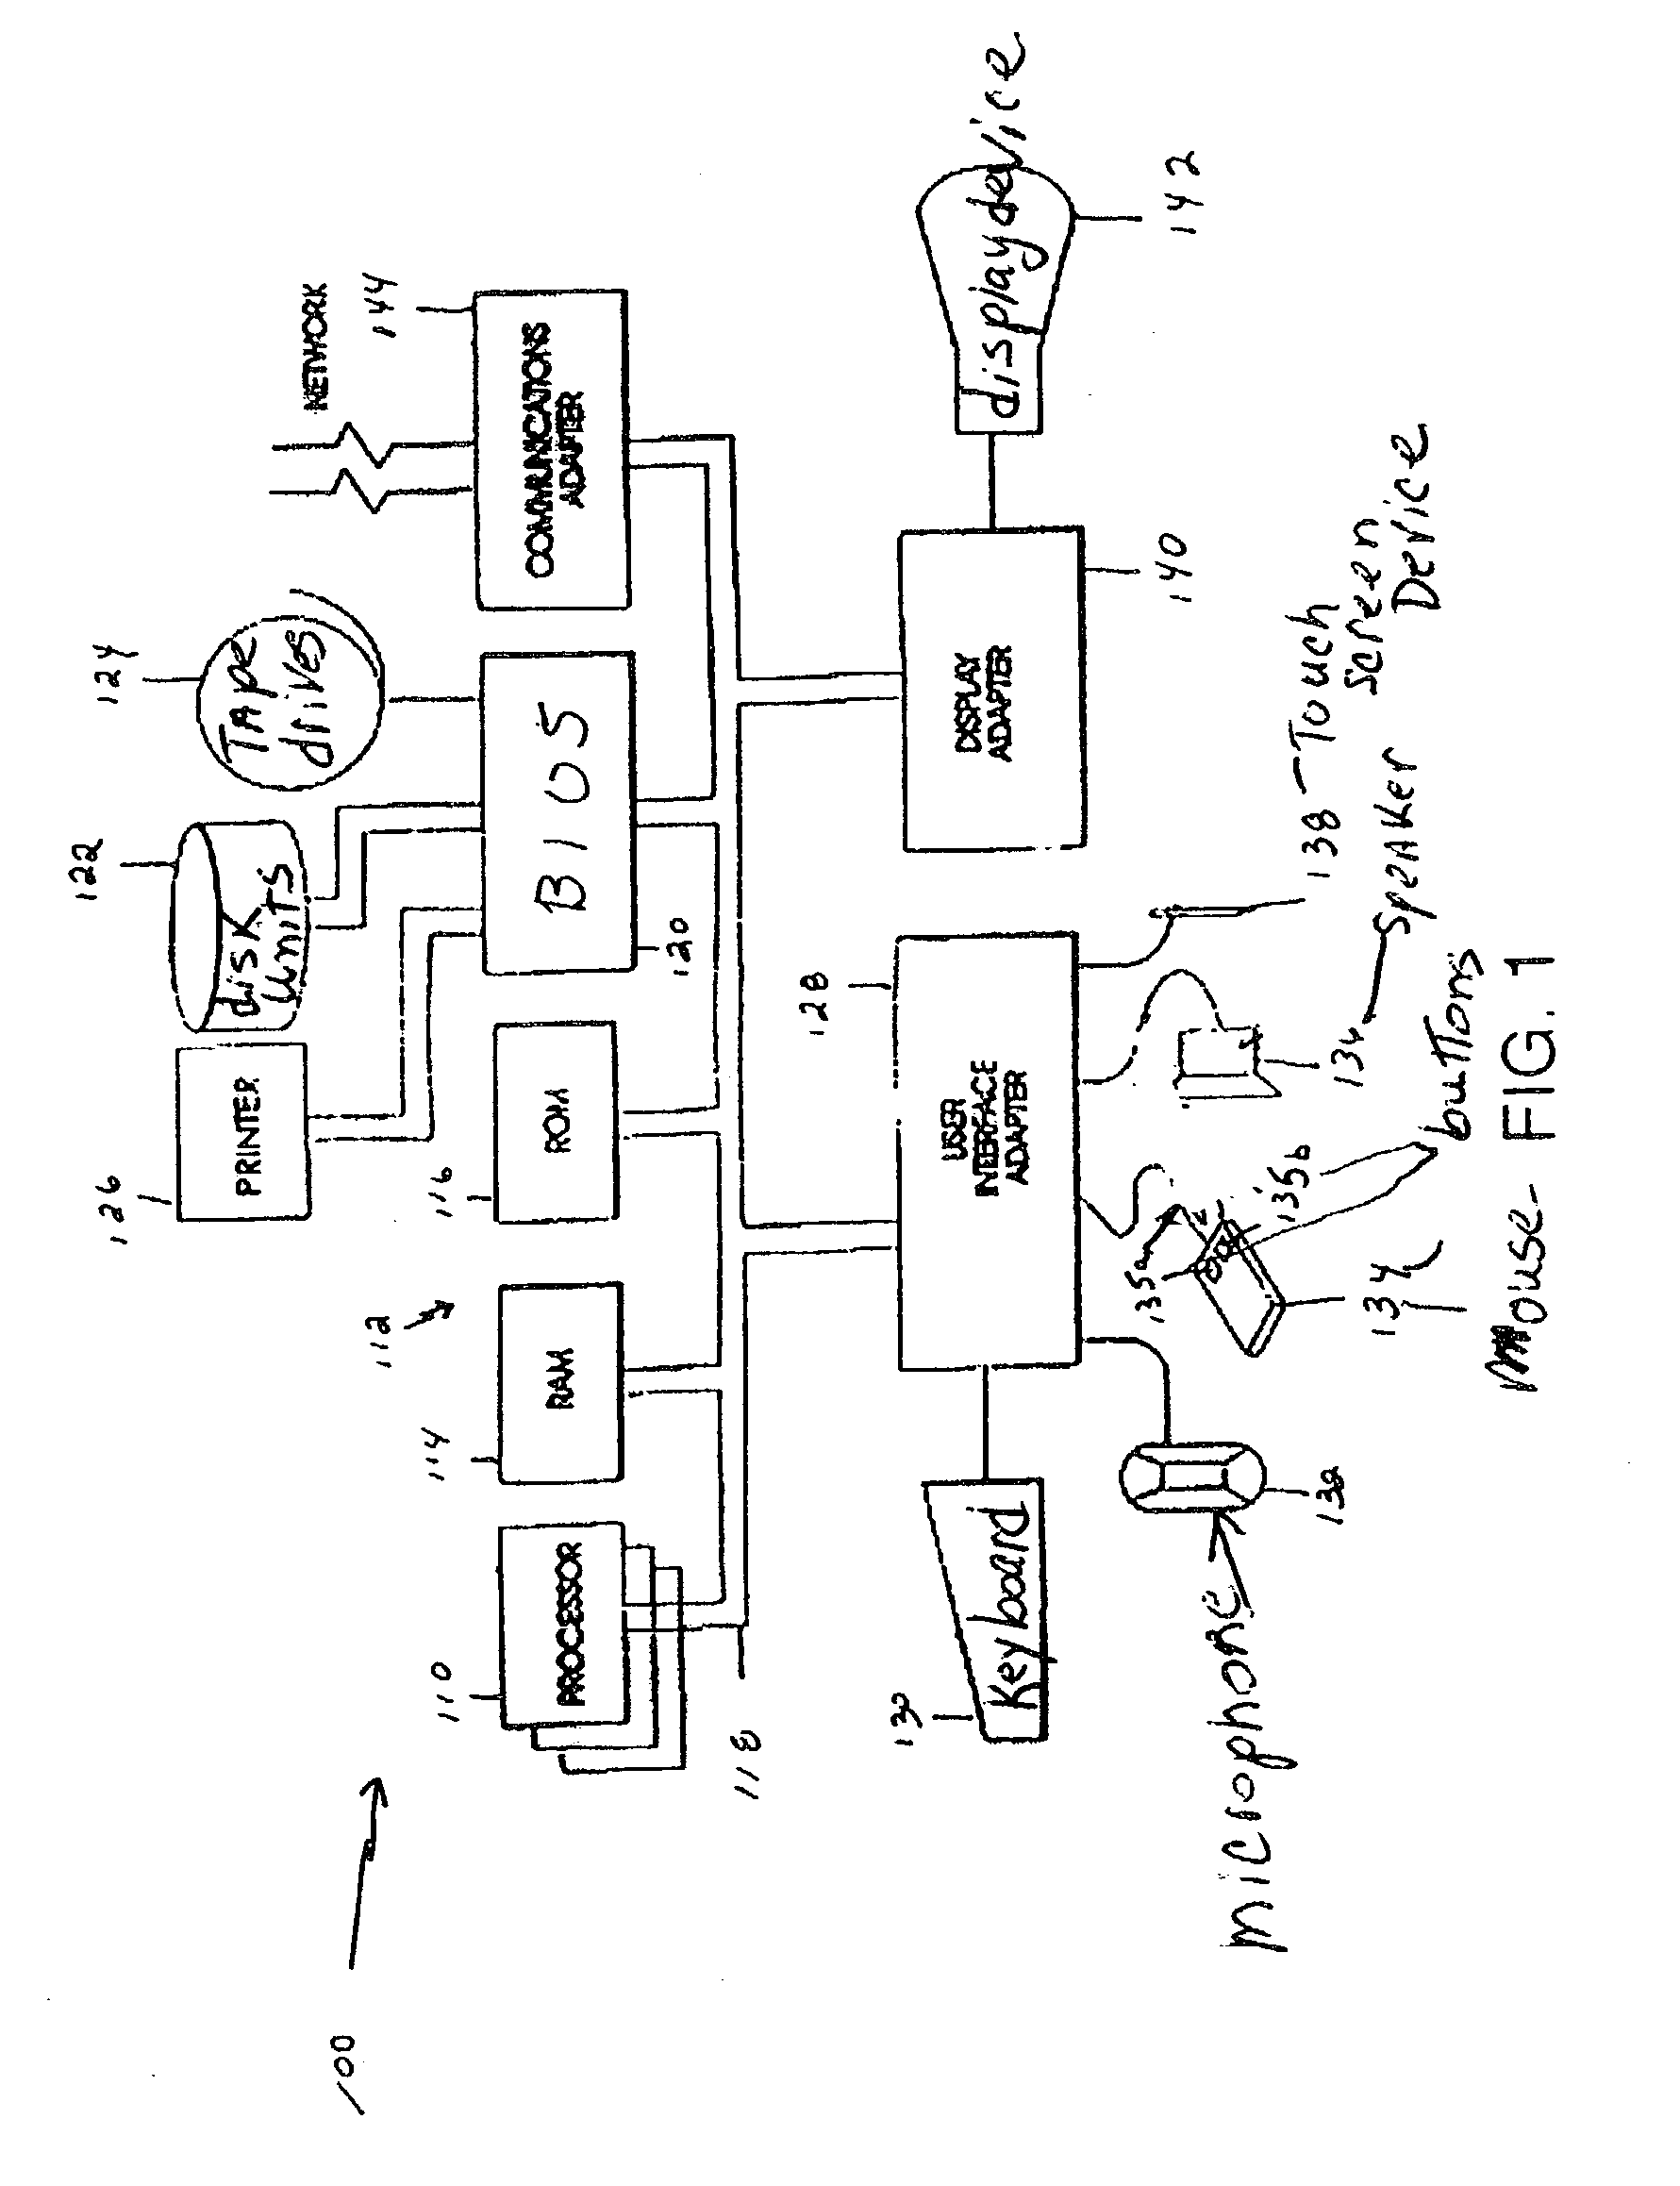 System and method for organizing, managing, and manipulating desktop objects with an activity-oriented user interface